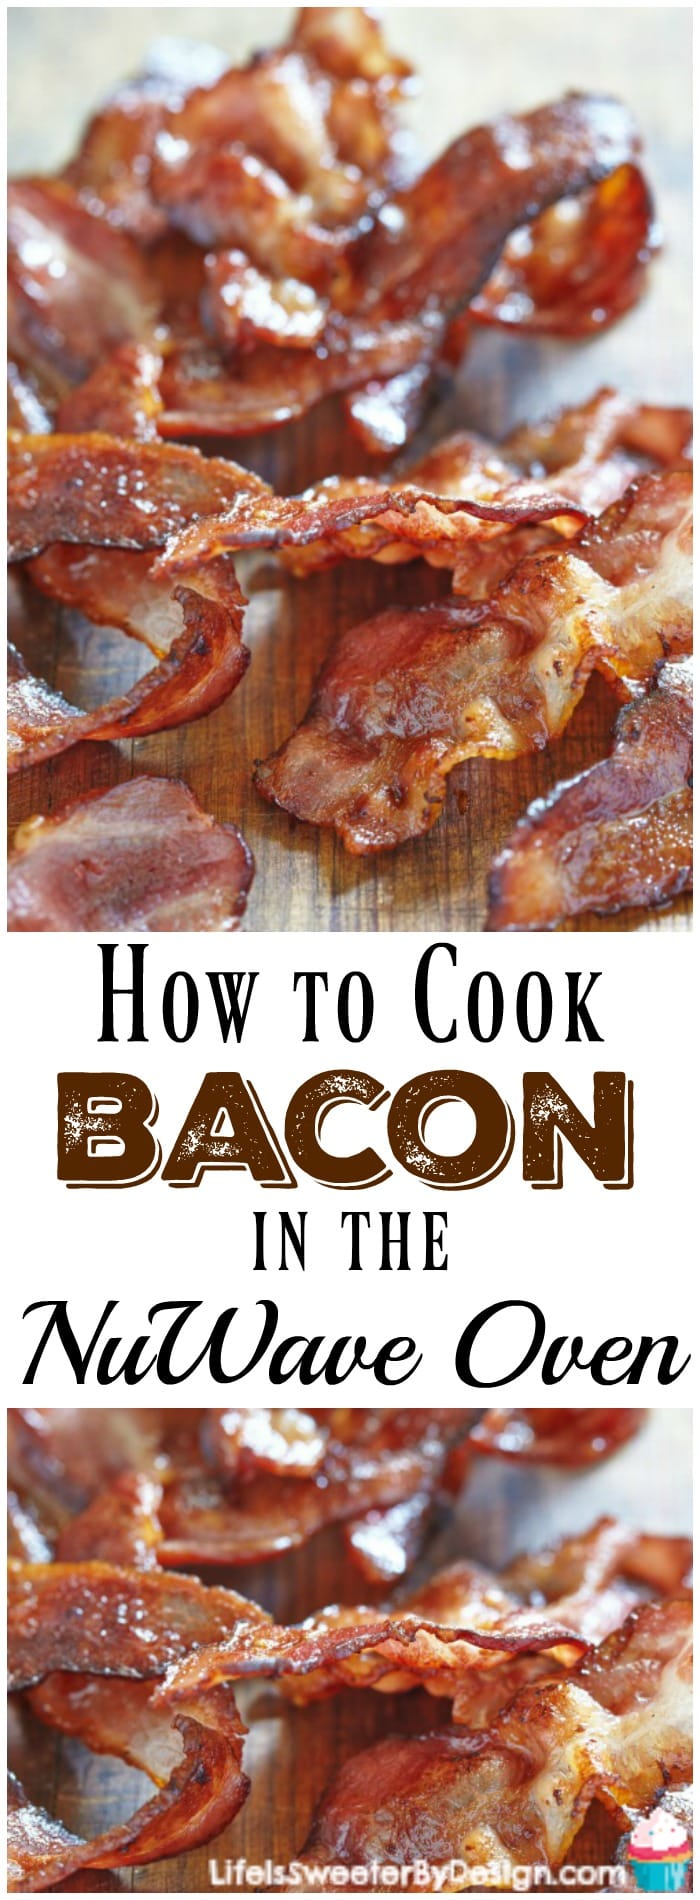 Find out how to cook bacon in the NuWave Oven. It is the easiest way to cook bacon and you will love how crispy it is!